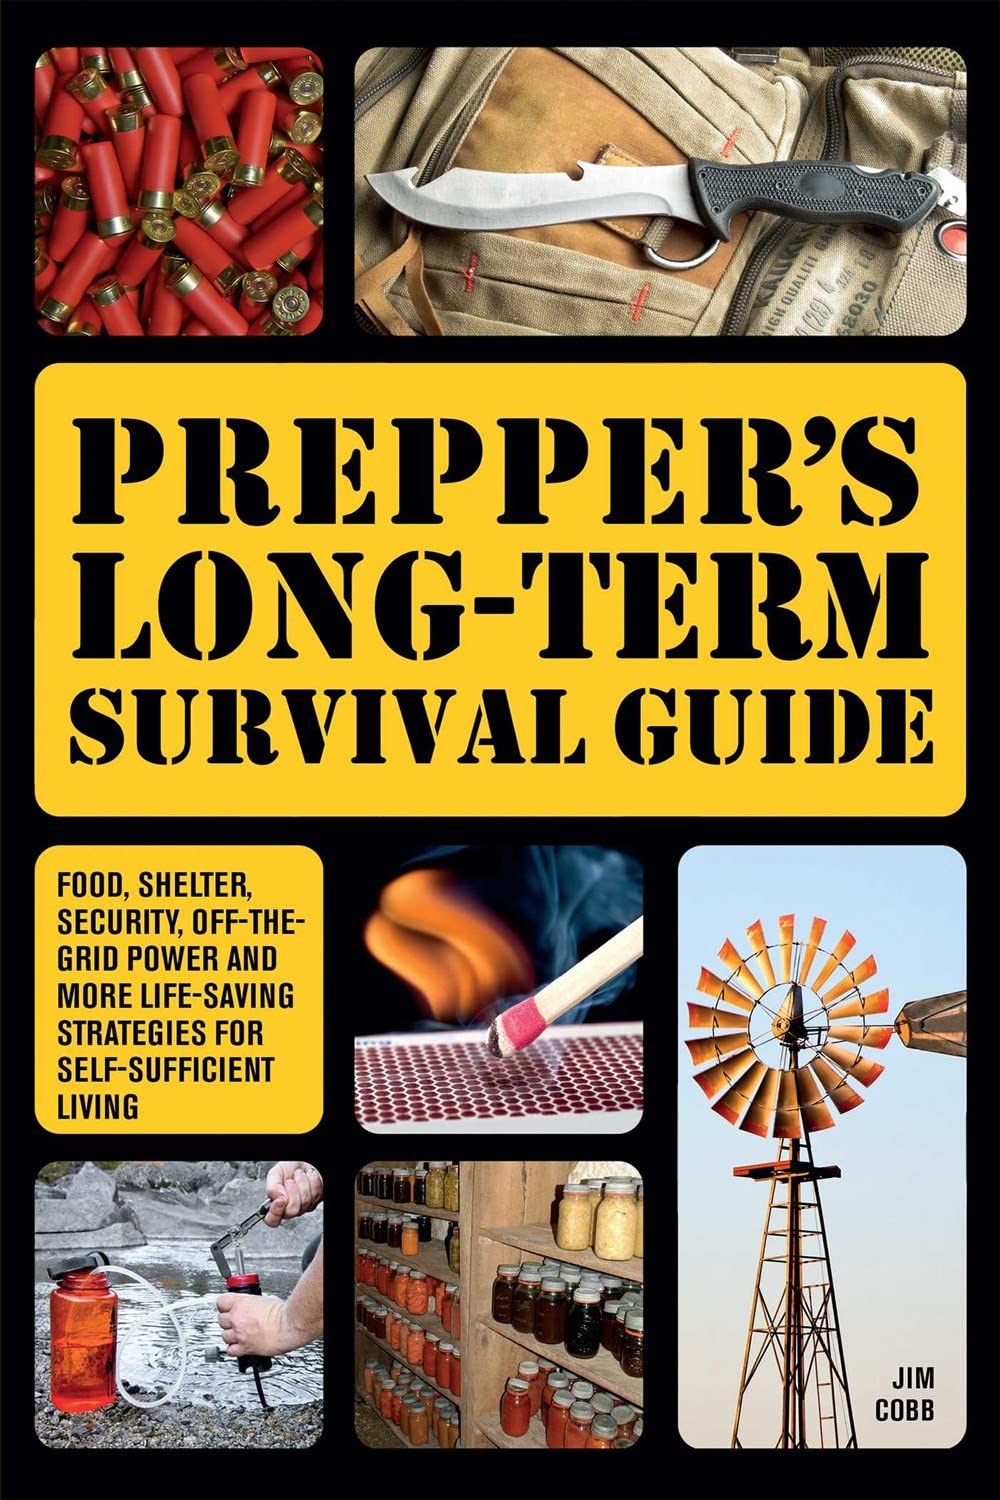 Prepper’s Long-Term Survival Guide: Food, Shelter, Security, Off-the-Grid Power and More Life-Saving Strategies for Self-Sufficient Living (Books for Preppers)